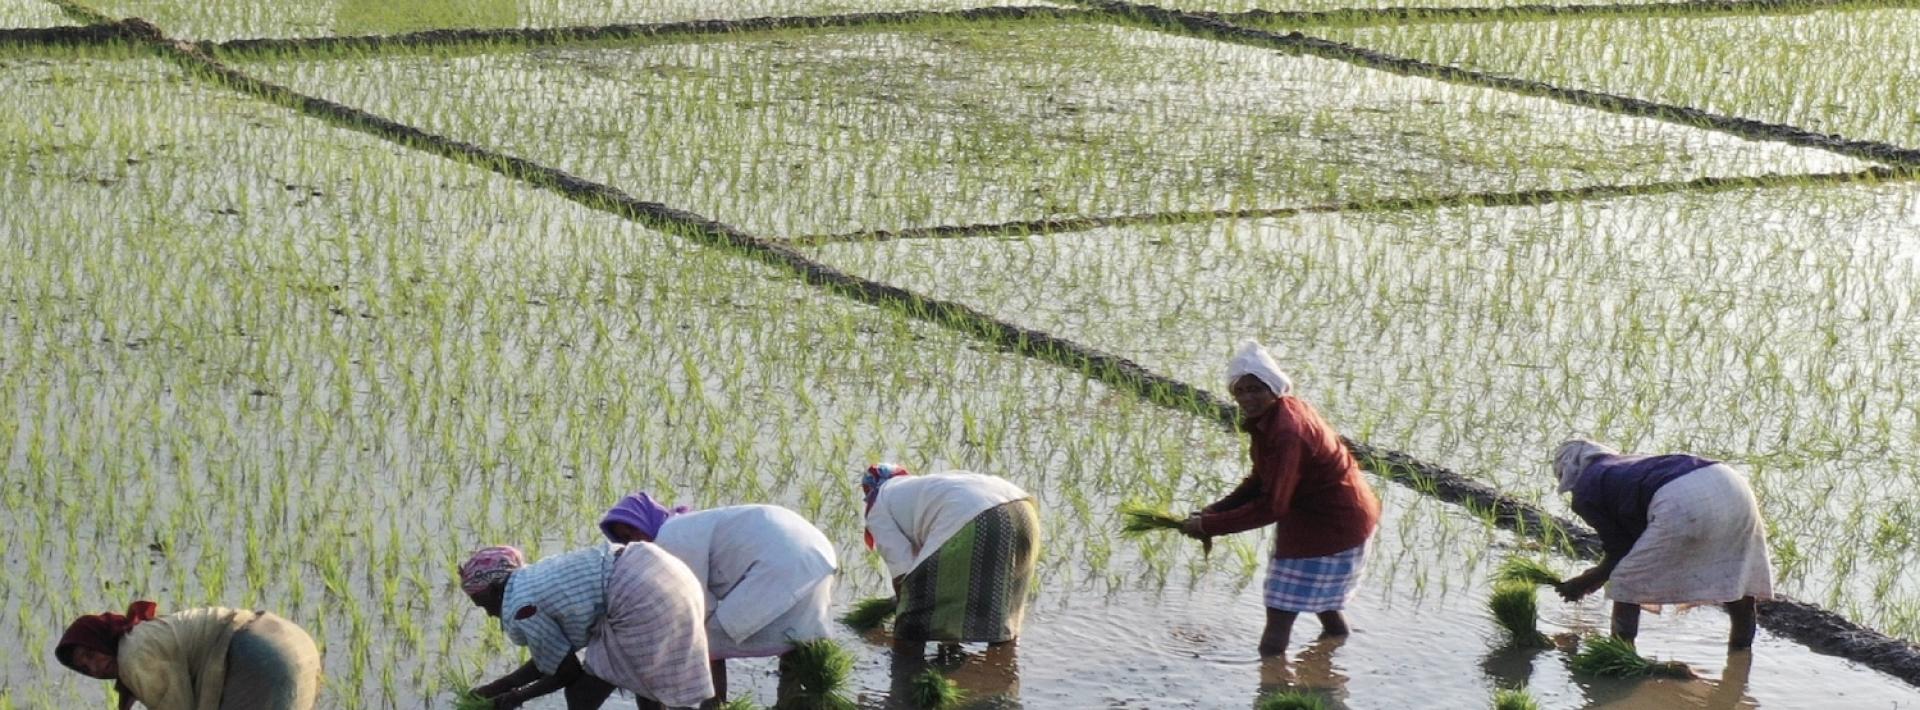 people harvesting rice from a paddy field in Goa